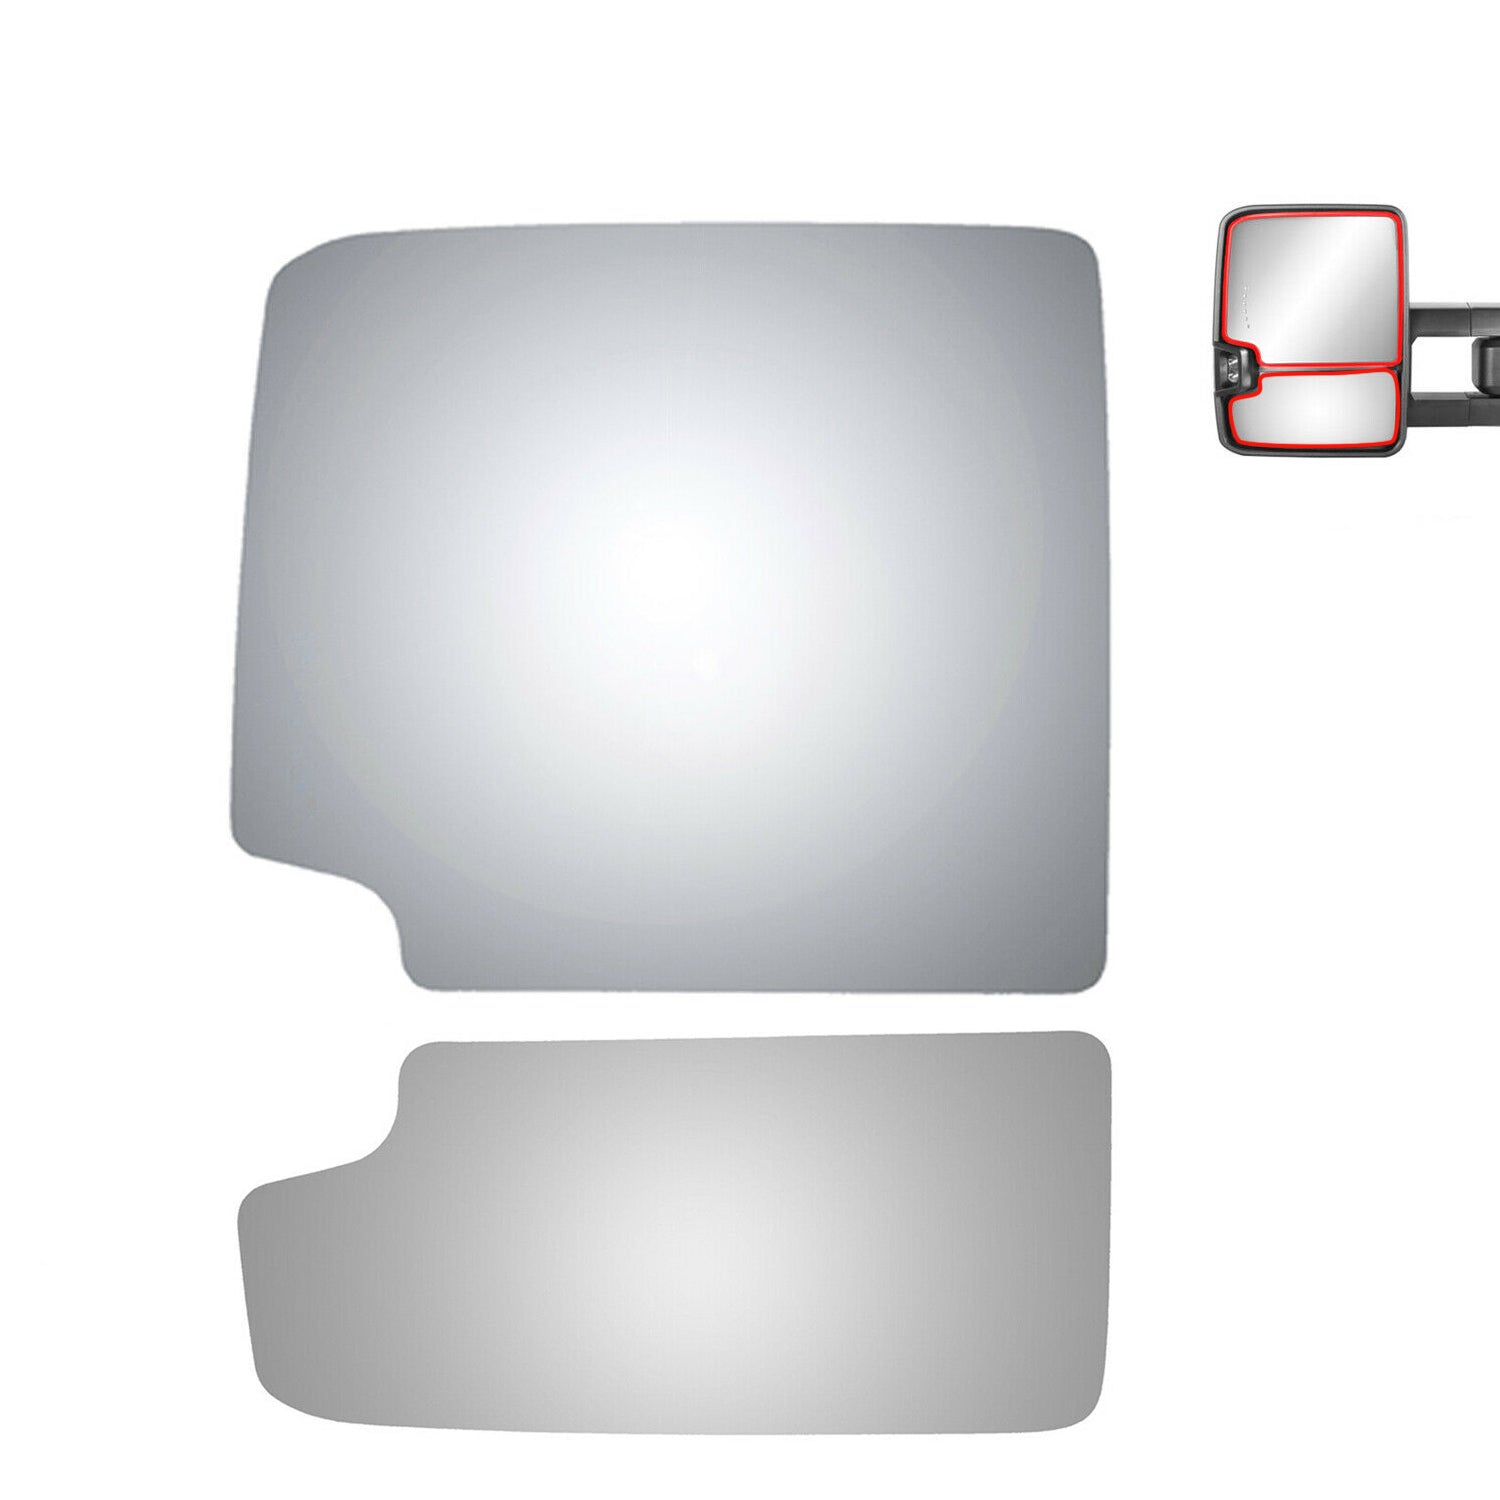 WLLW a Pair of Towing Mirror Glass for Cadillac Escalade/ Chevy Avalanche Blazer /GMC Jimmy Sierra Yukon, Driver Left/Passenger Right/The Both Sides Upper&Lower Flat Convex D-0019